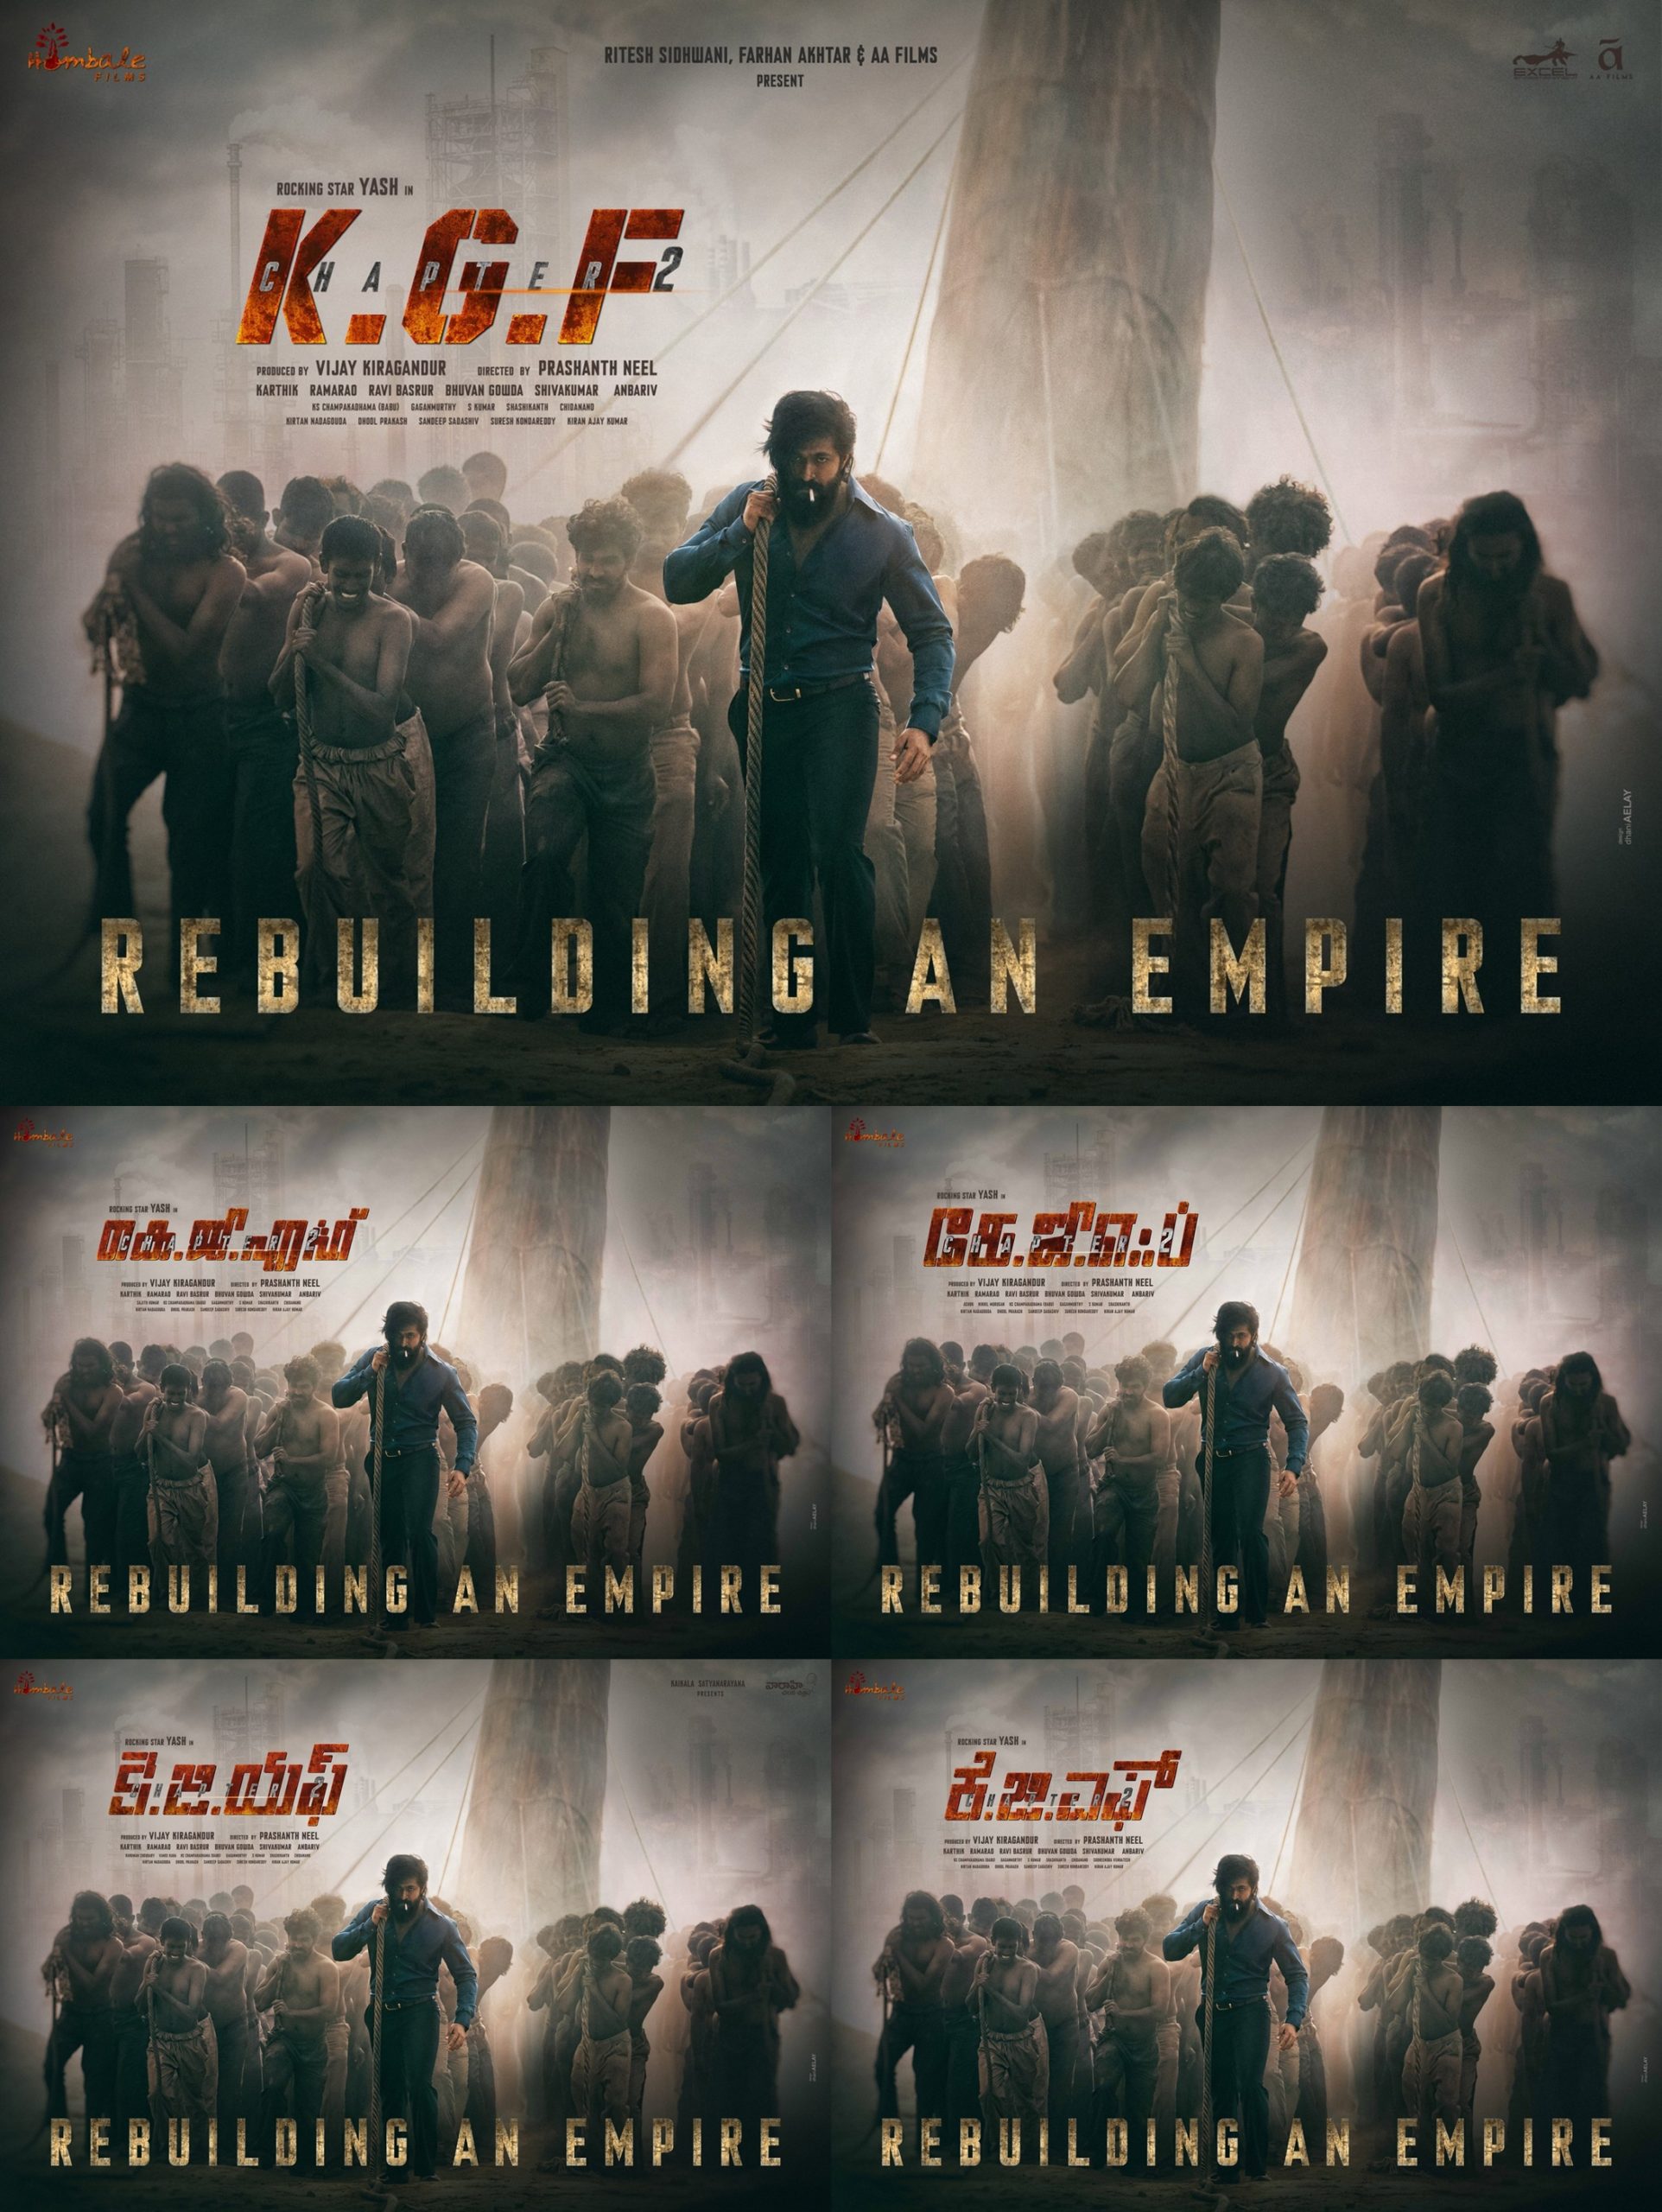 KGF chapter 2 First look Unveiled with 'Rebuilding an Empire' Slogan - Full Rage!